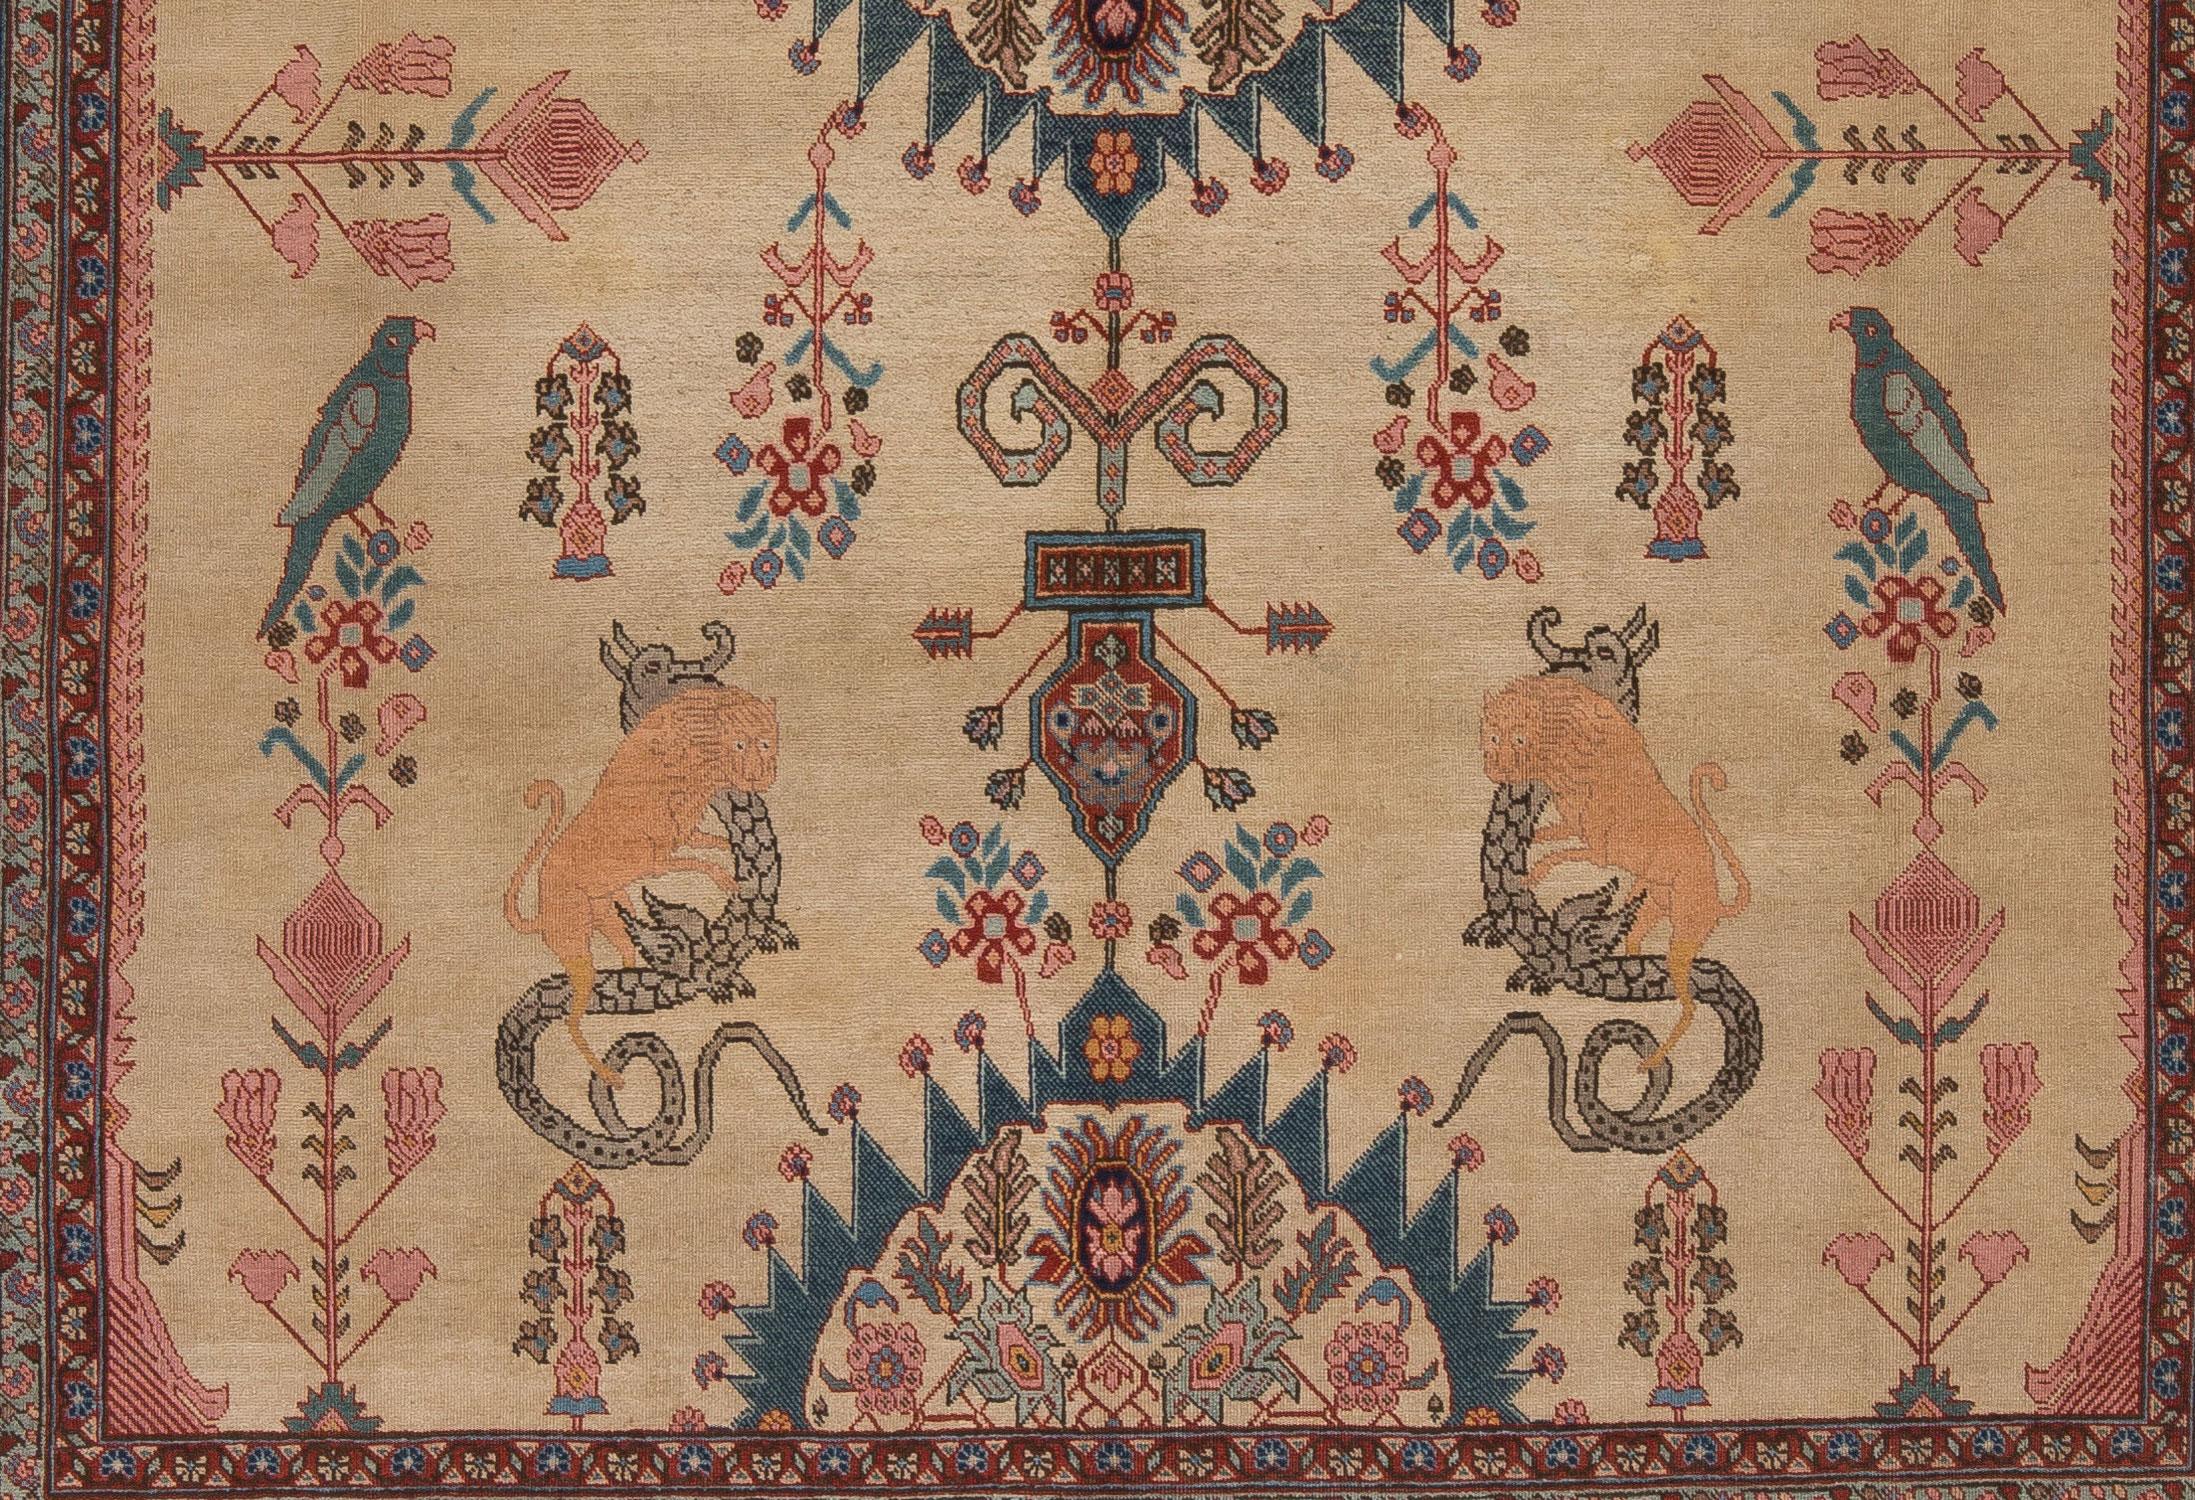 An unusual, turn of the century Antique Persian Tabriz with a warm ivory field and whimsical design incorporating animals and floral motifs. A finely woven, sophisticated carpet with an even, low wool pile. Naturally dyed with navy, indigo, pink,